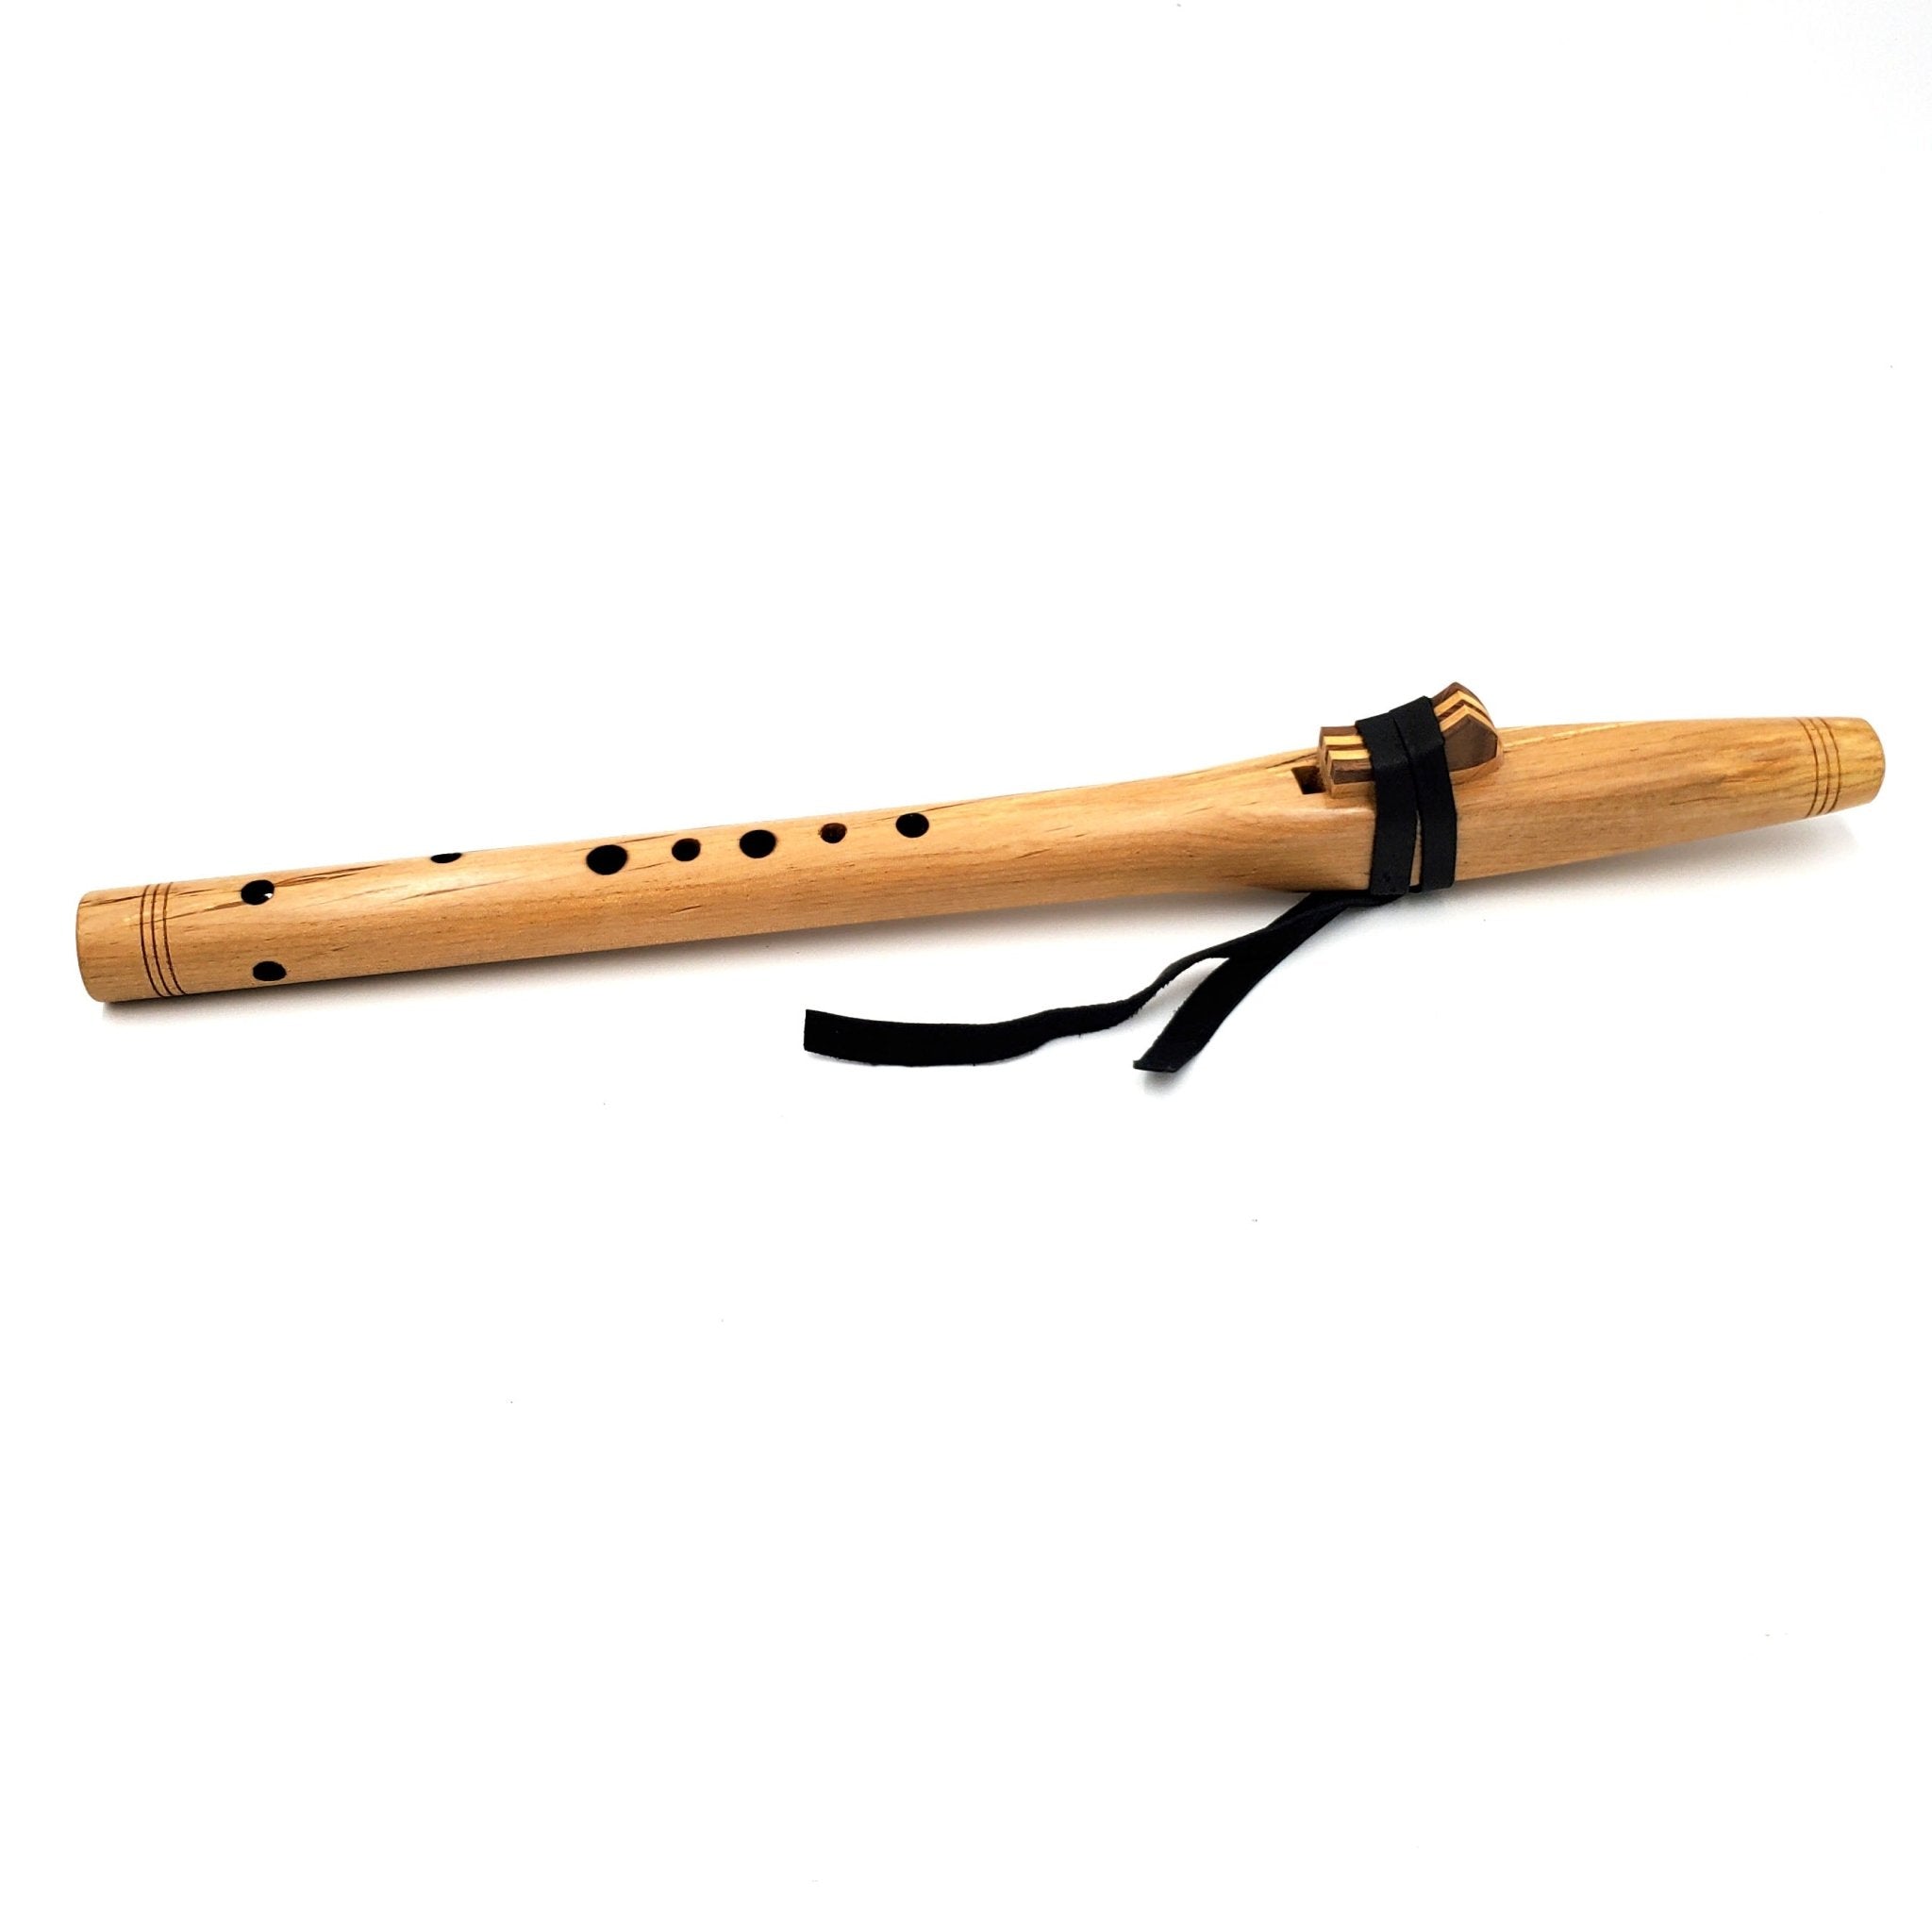 Spalted Alder Hijaz Flute in the key of high C  - #2300